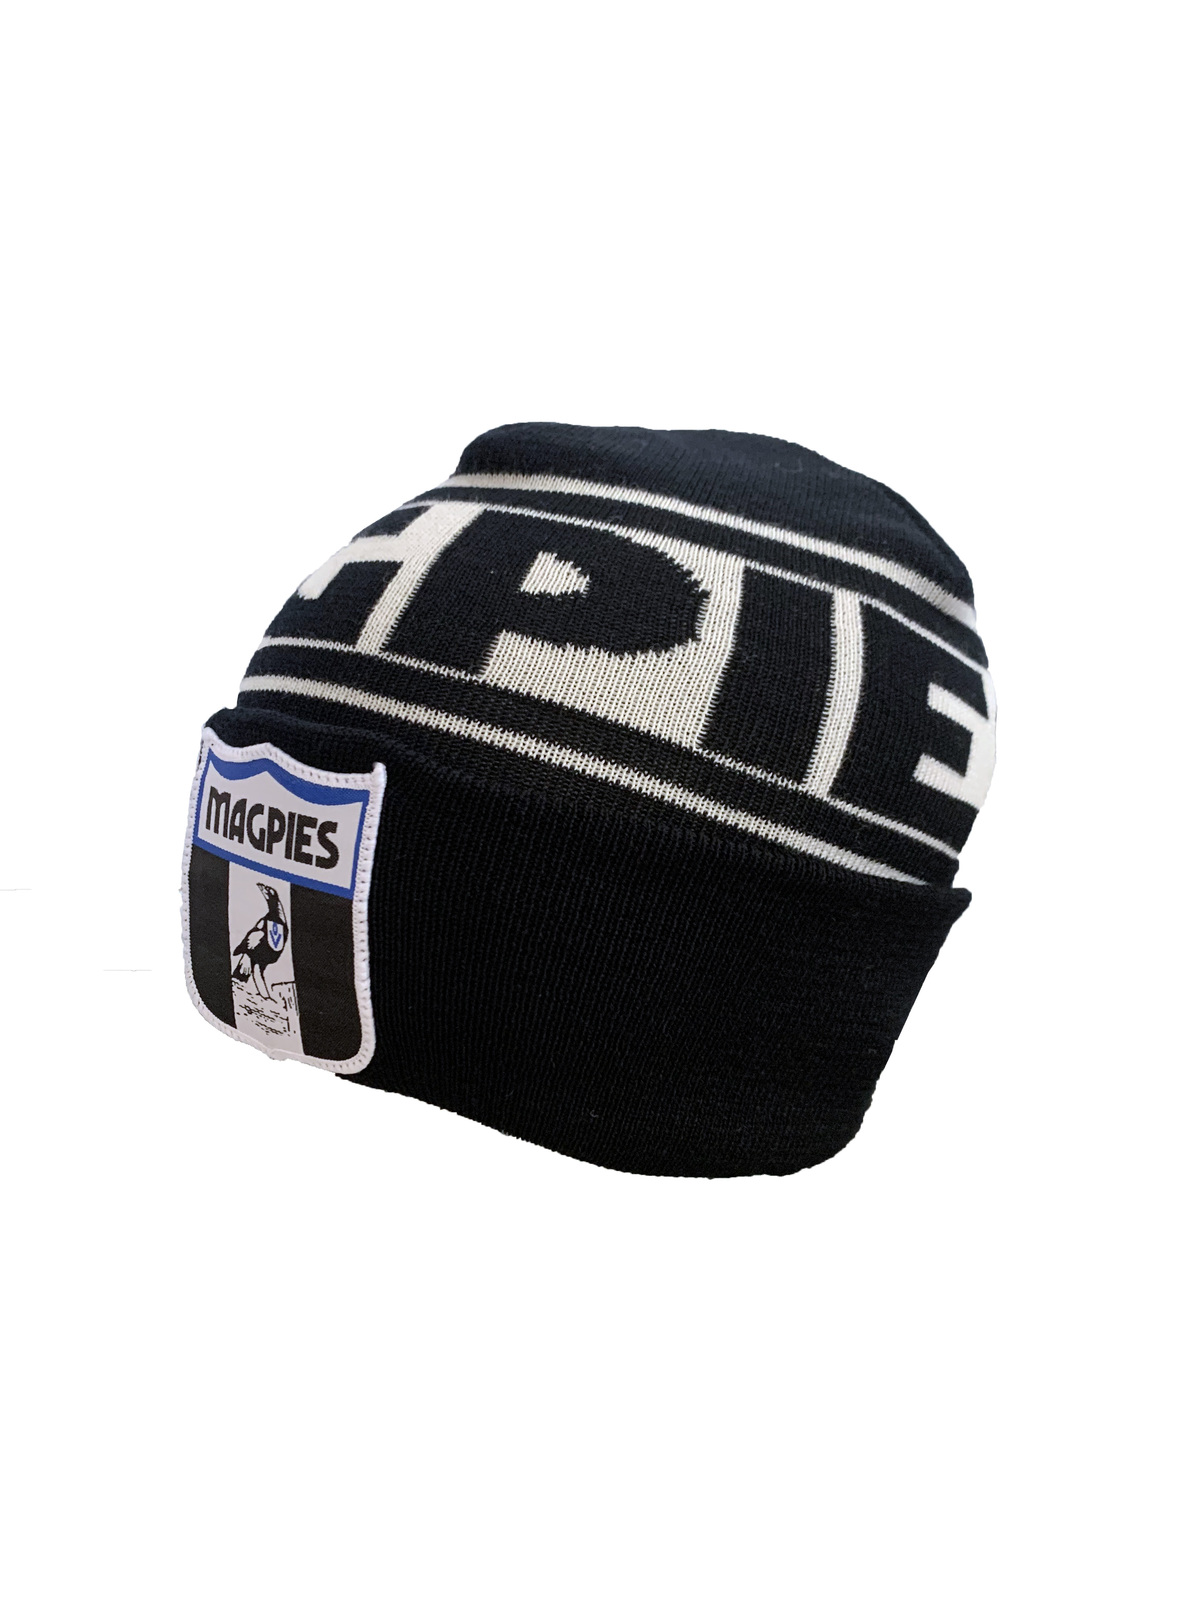 Geelong Cats AFL 2021 Playcorp Flashback Beanie BNWT's! 